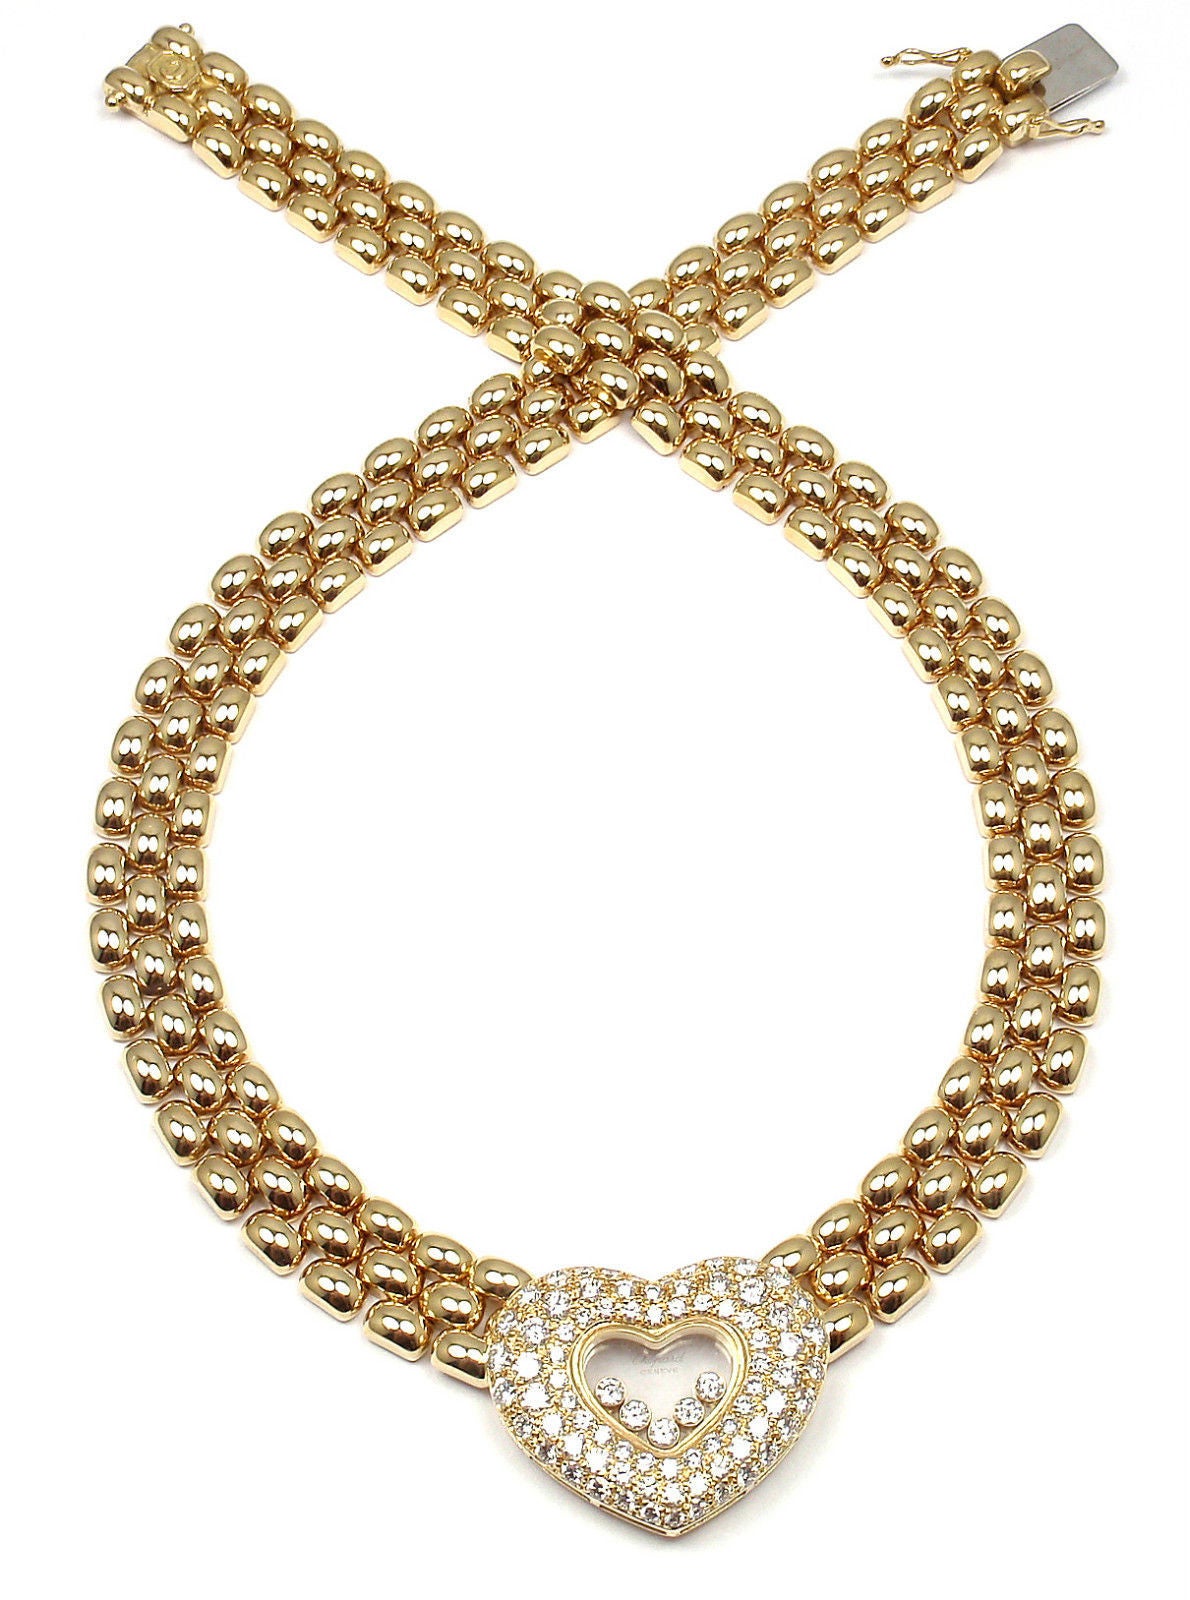 18k Yellow Gold Happy Diamonds Diamond Heart Necklace 
by Chopard. 
With 83 round brilliant cut diamonds VVS1 clarity, E color total weight approx. 2.59ct

Details:
Chain: Length: 16